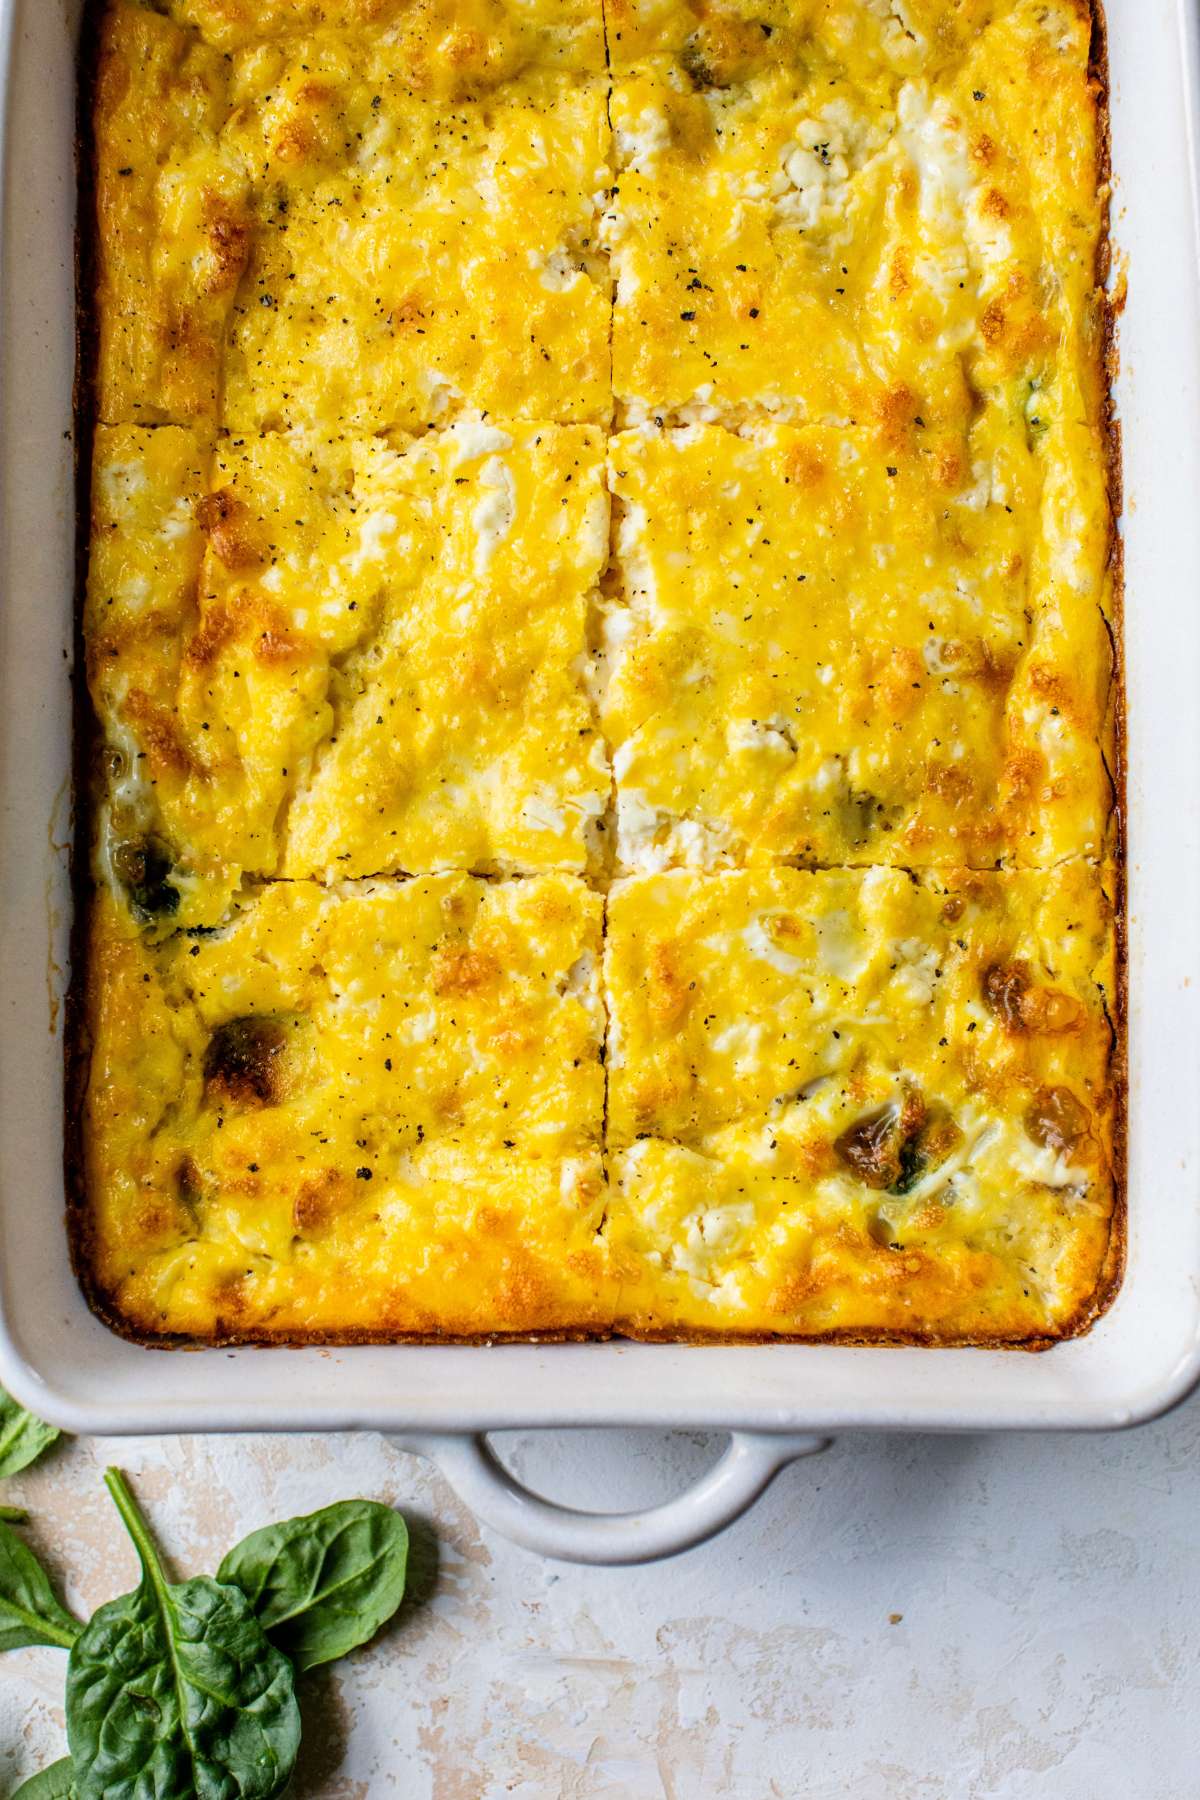 Baked egg and cottage cheese bake cut into portions.